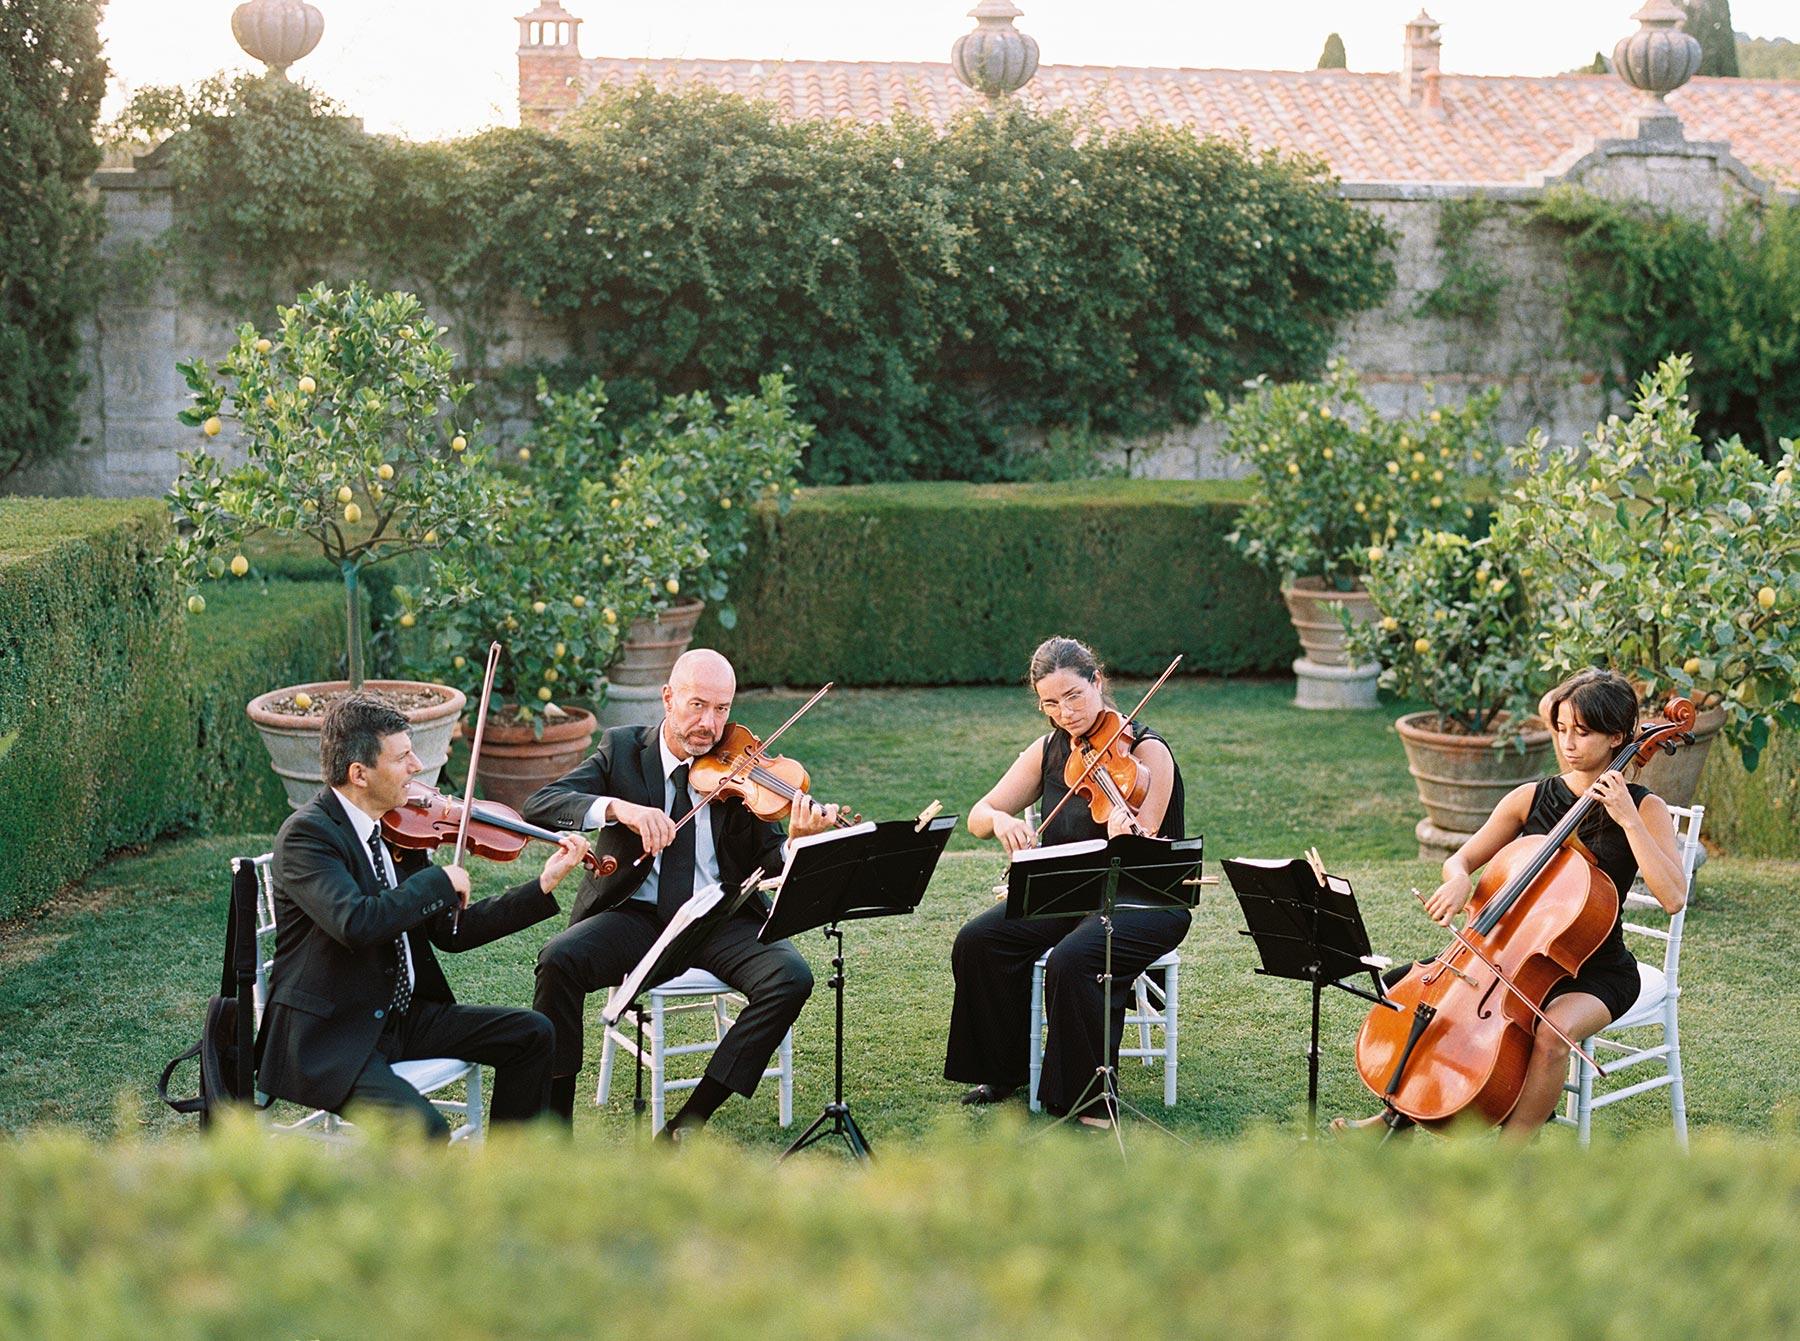 Summer Wedding in Tuscany at the Iconic La Foce